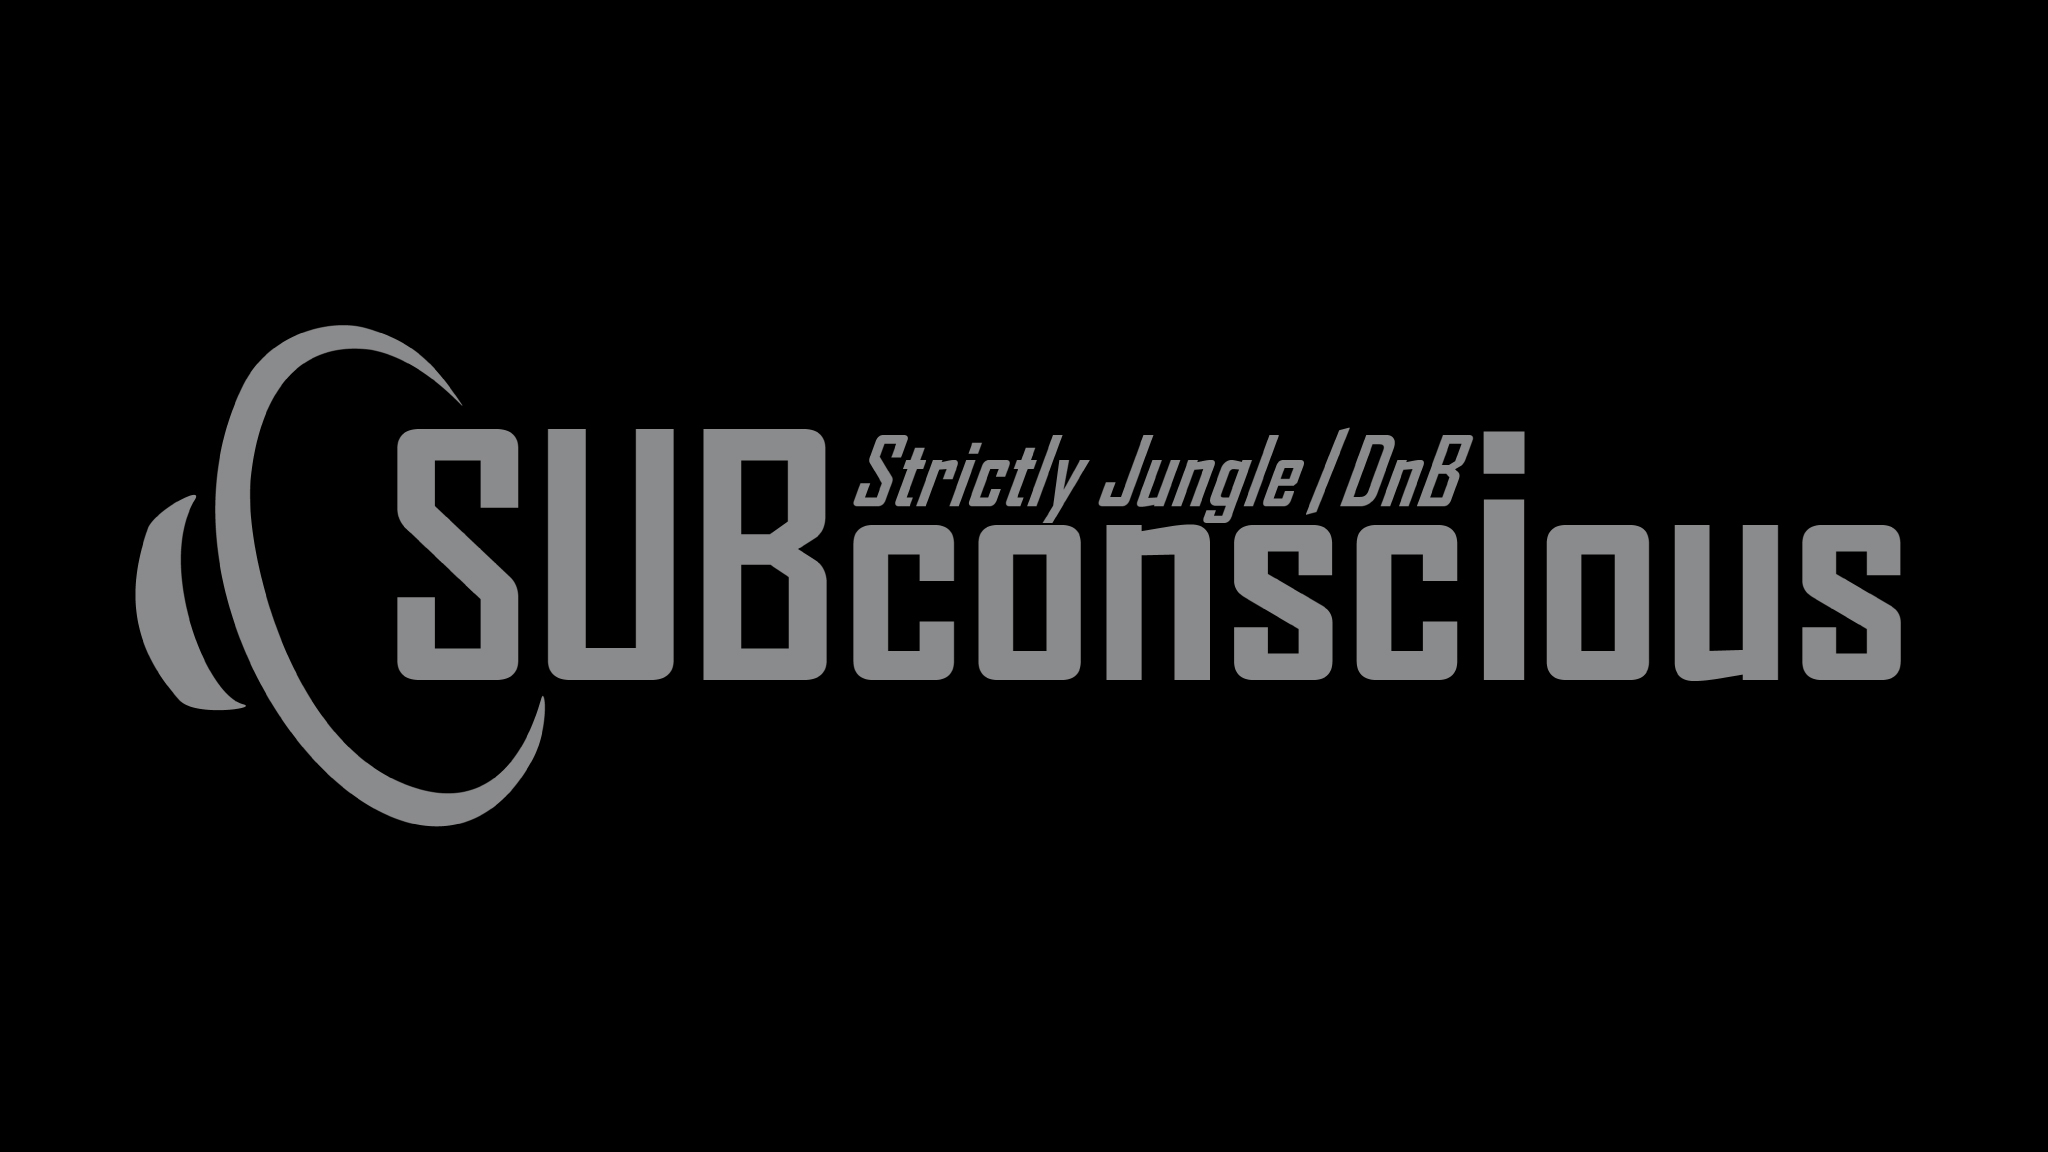 SUBconscious // Jungle Drum and Bass - Flyer front